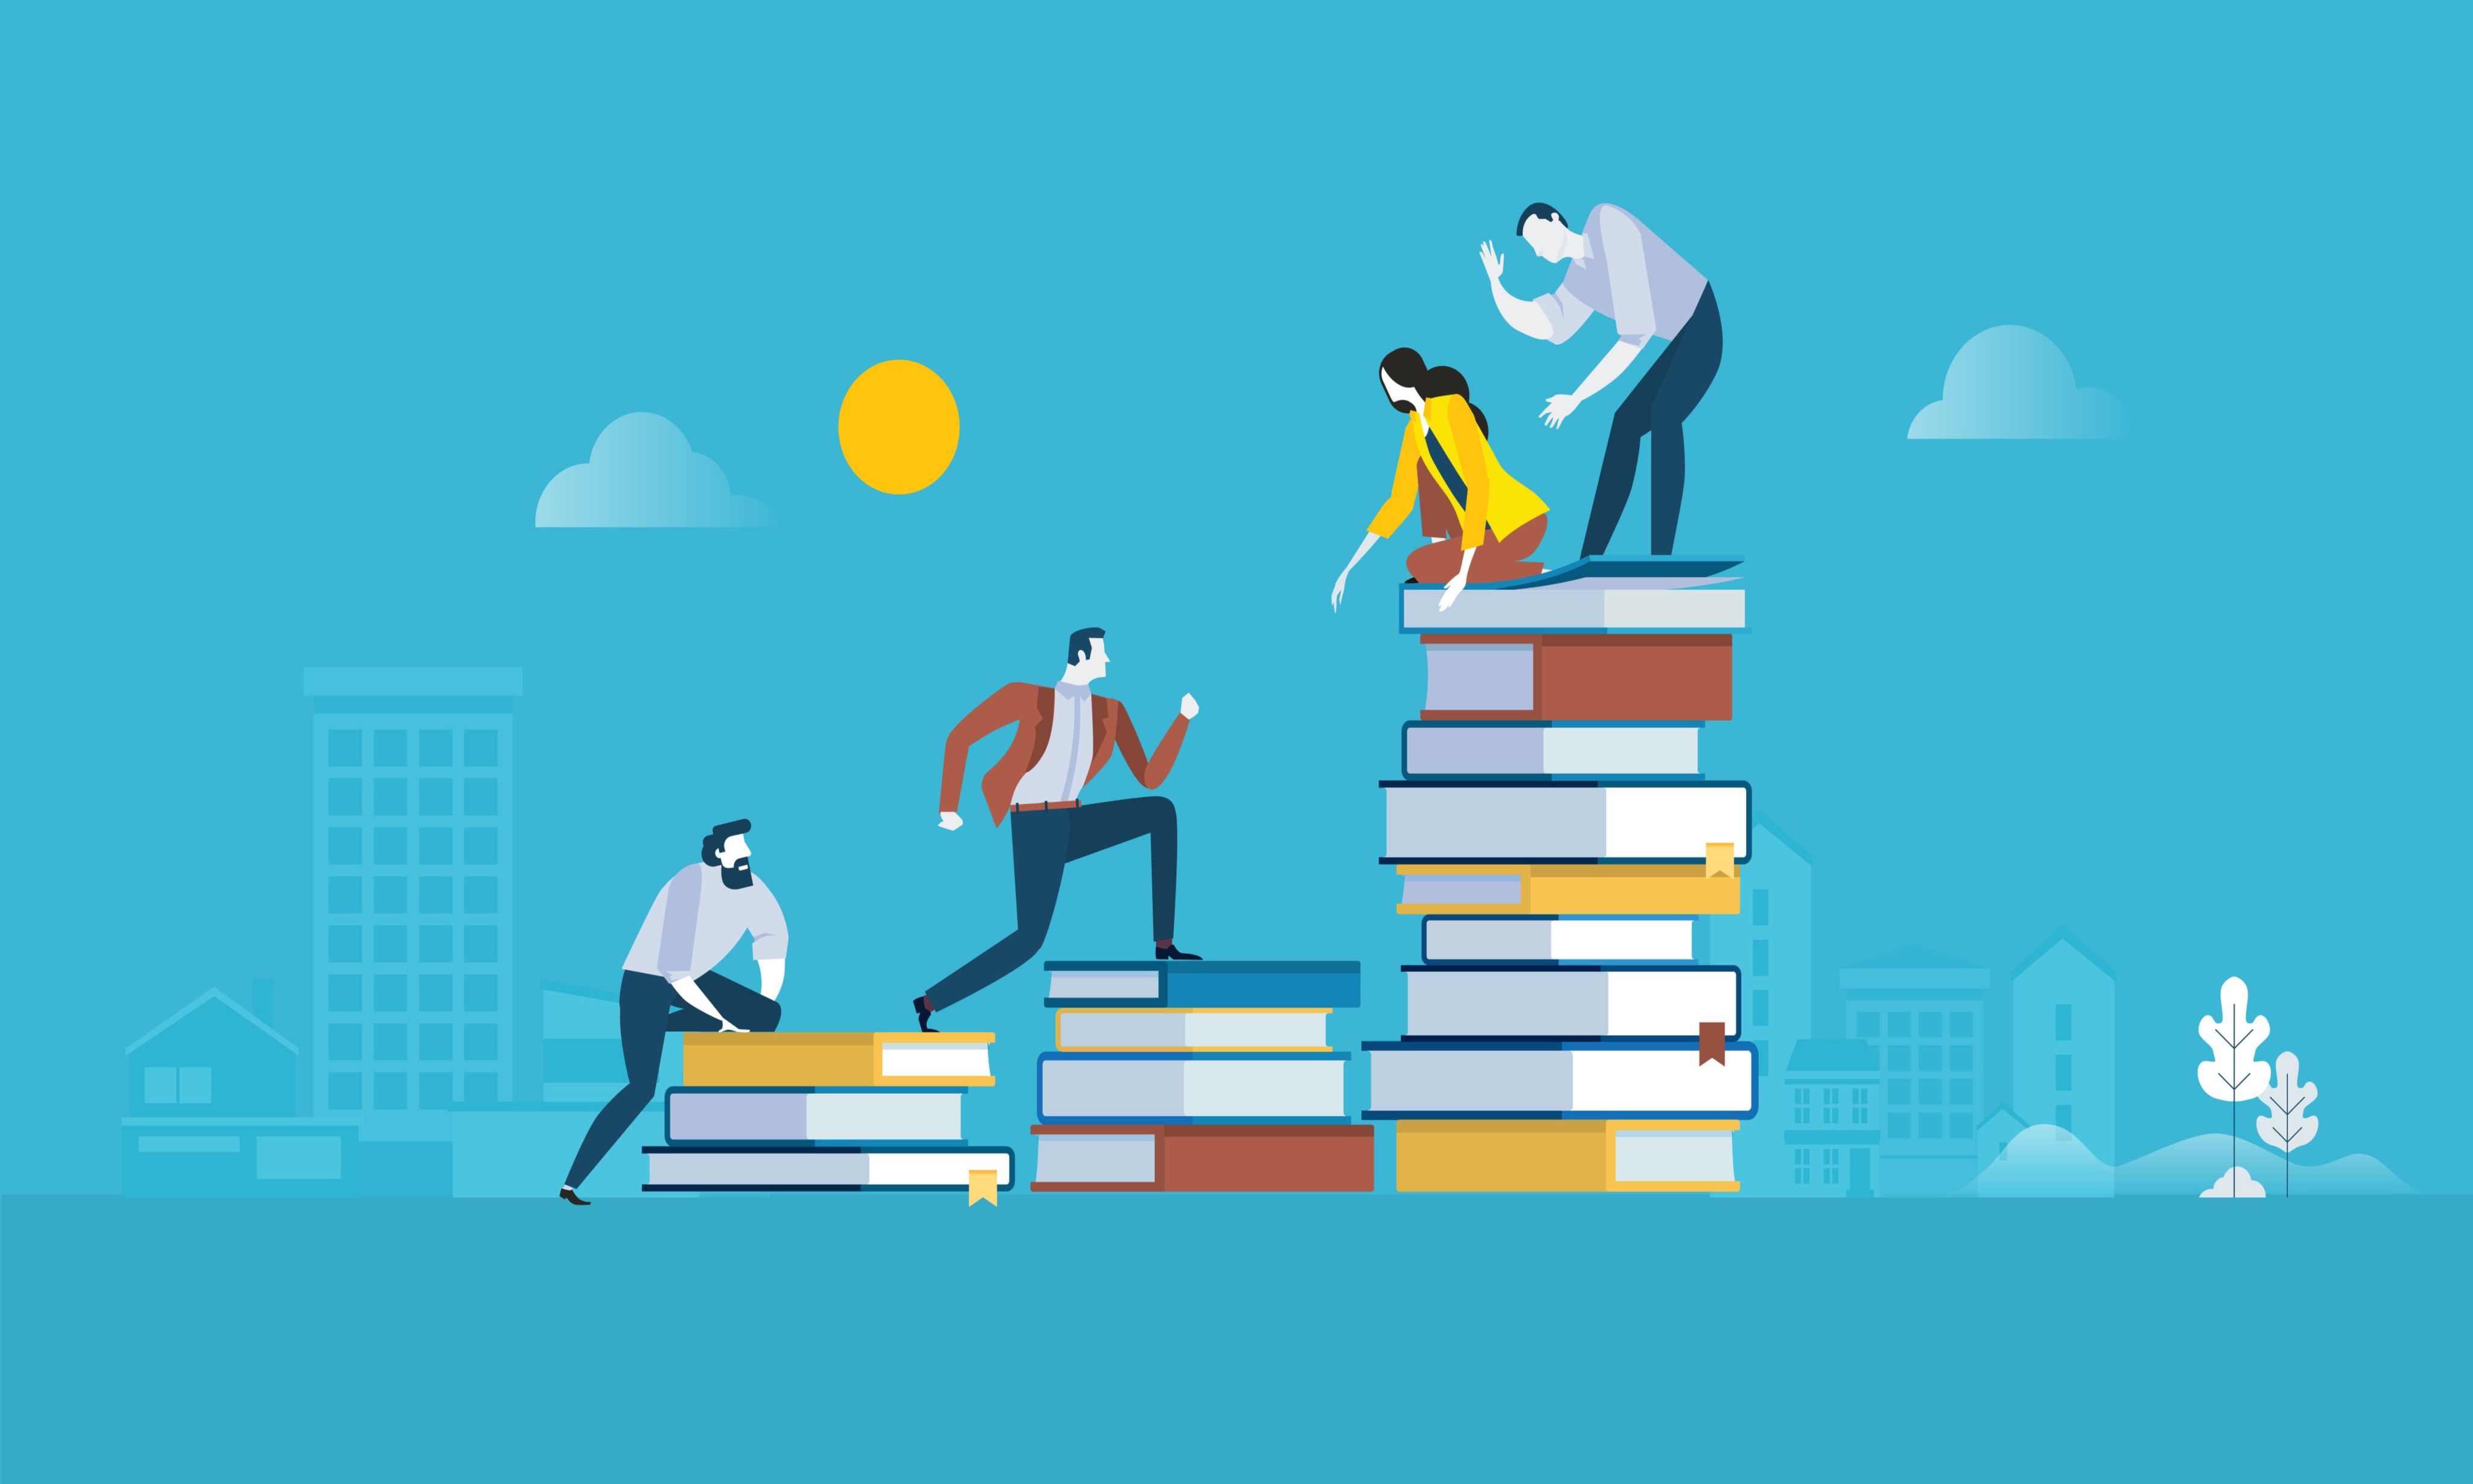 Vector image of professionals help others grow in their knowledge which is represented by stacks of books as staircases